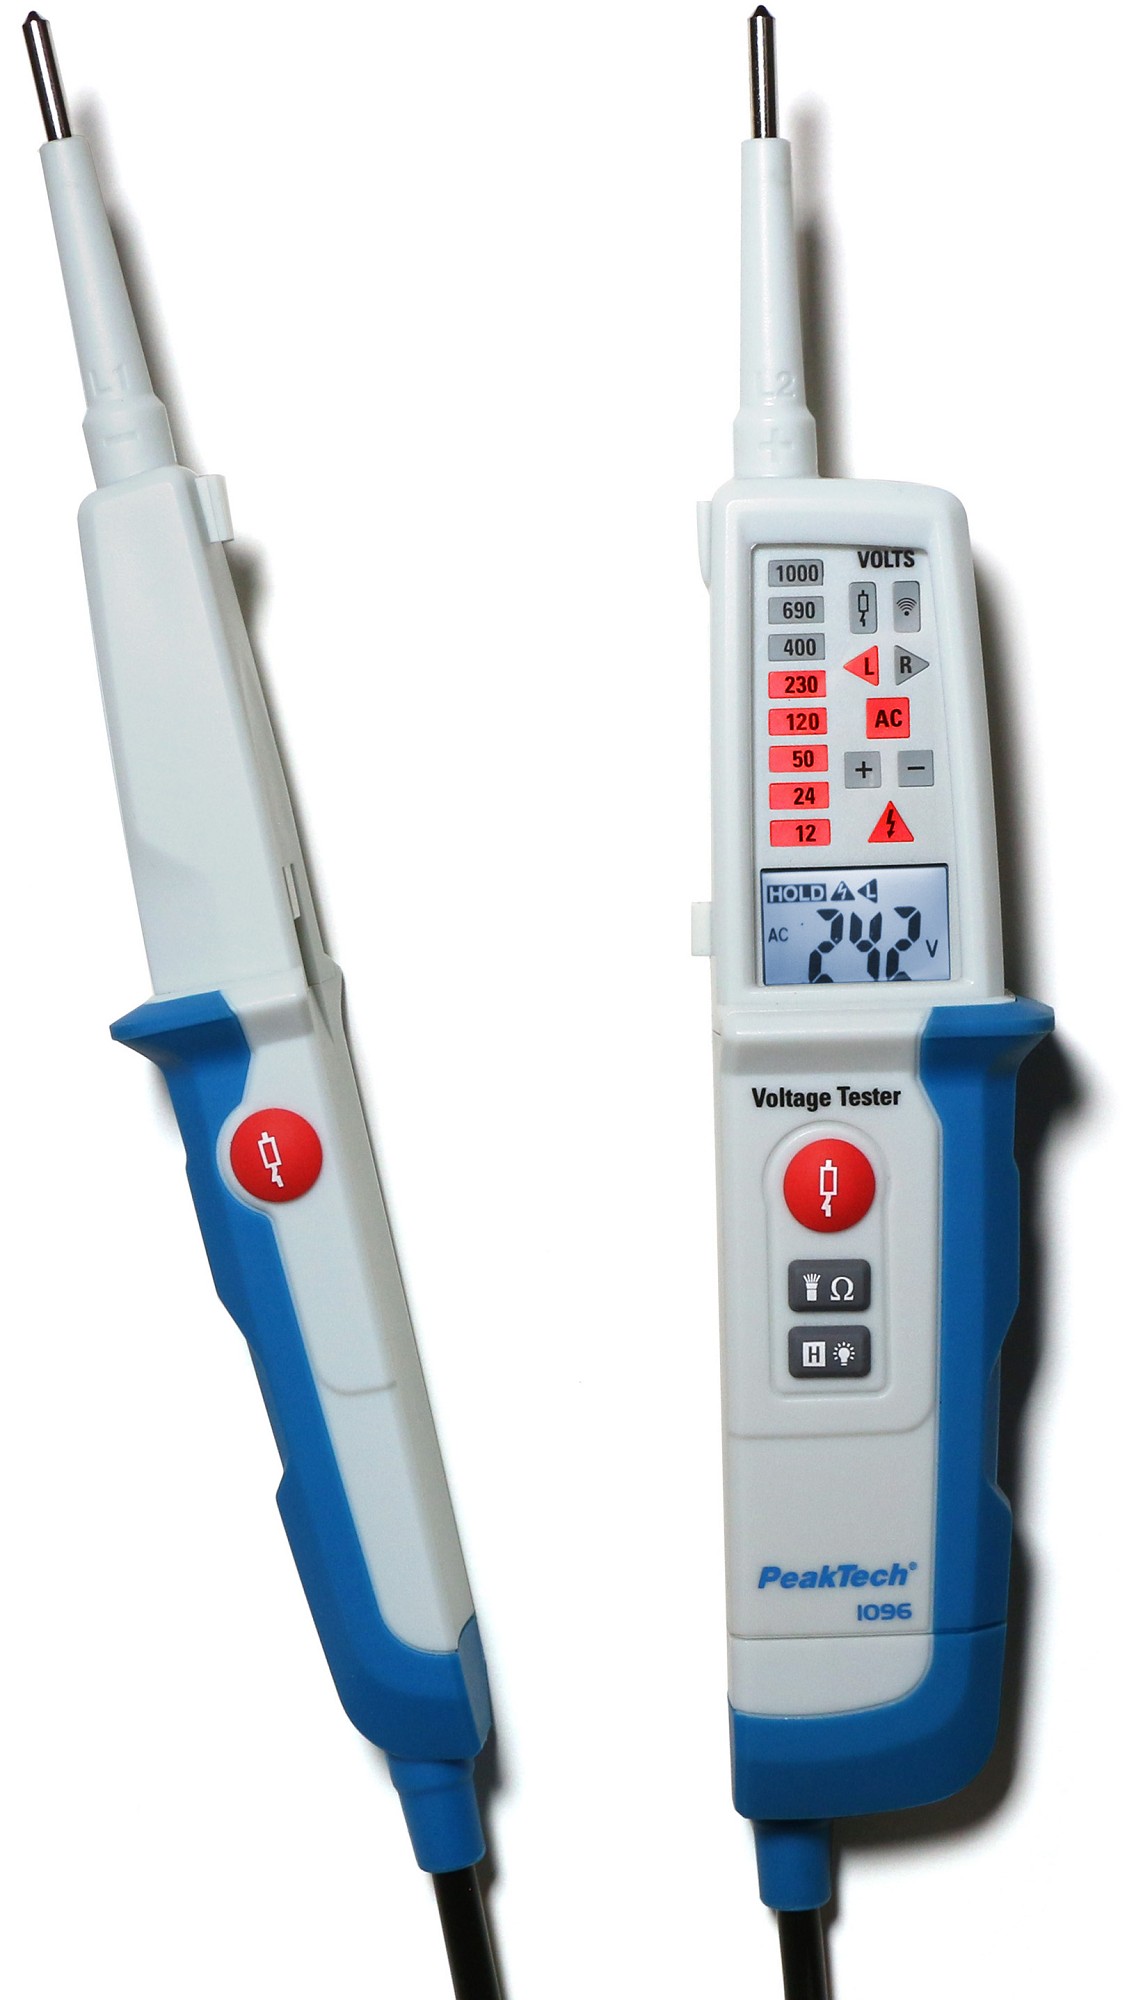 «PeakTech® P 1096» AC/DC voltage tester with RCD-test & dual display